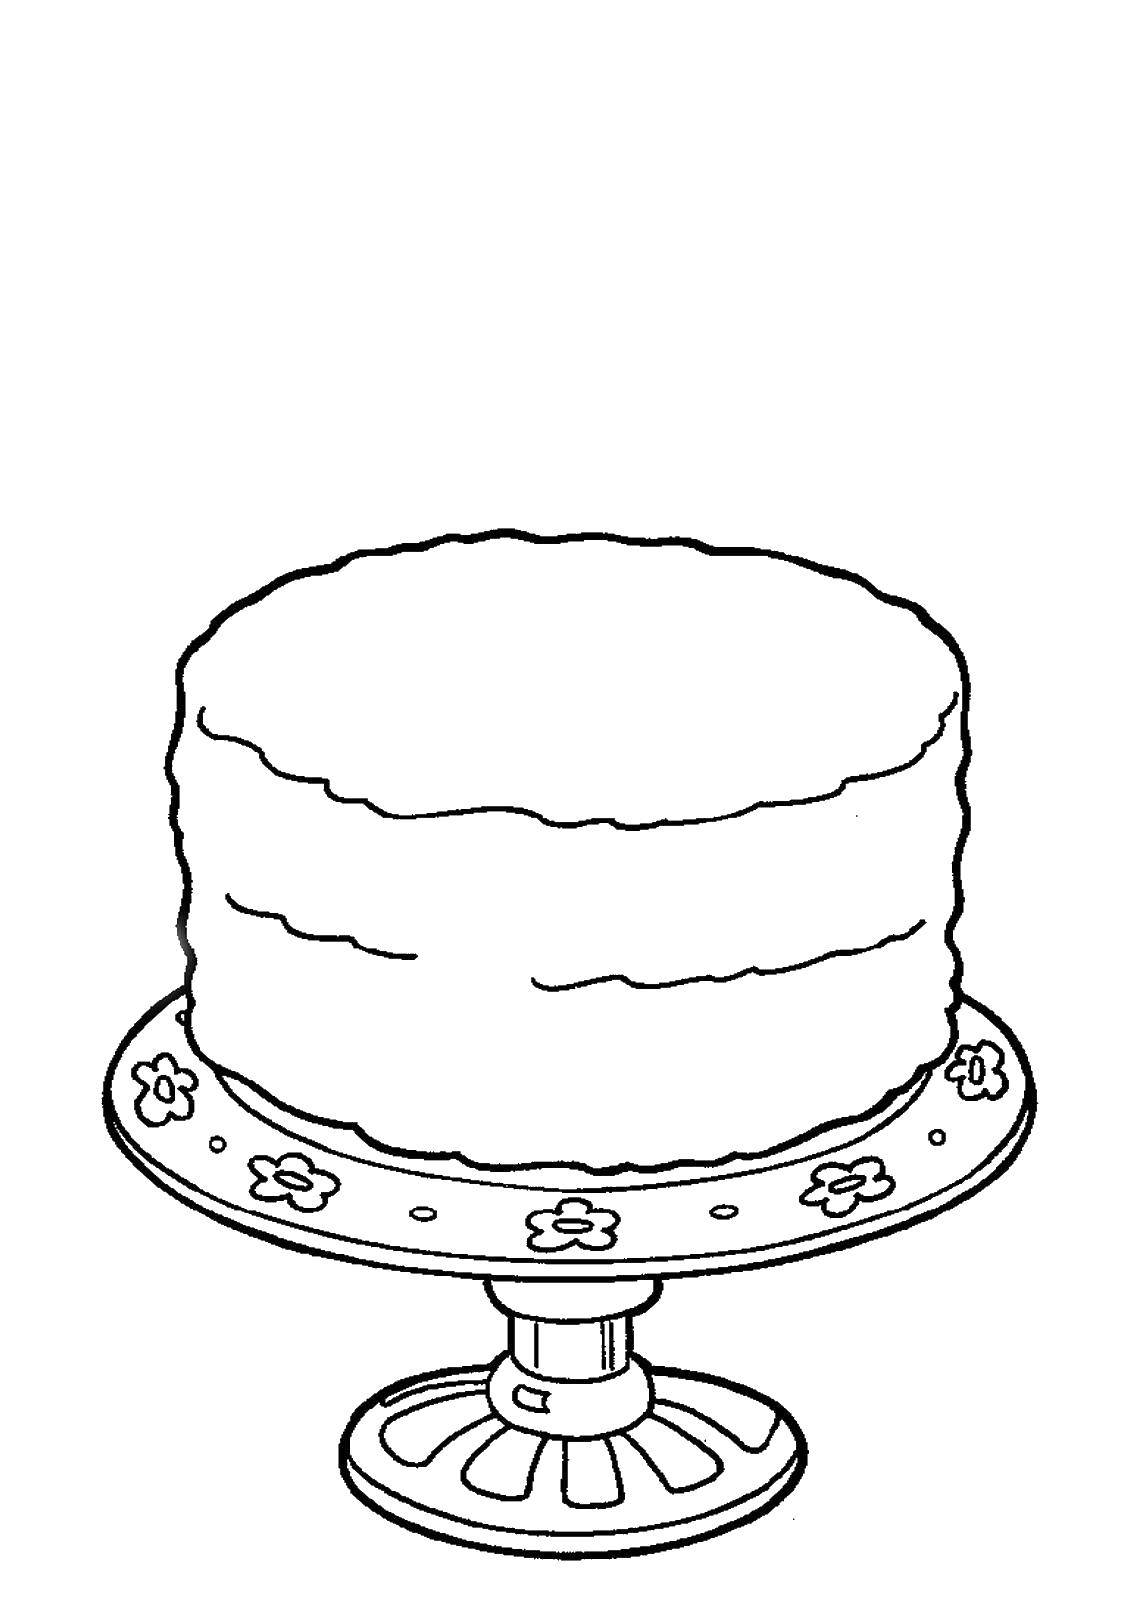 Coloring Cake stand. Category cakes. Tags:  the cake.